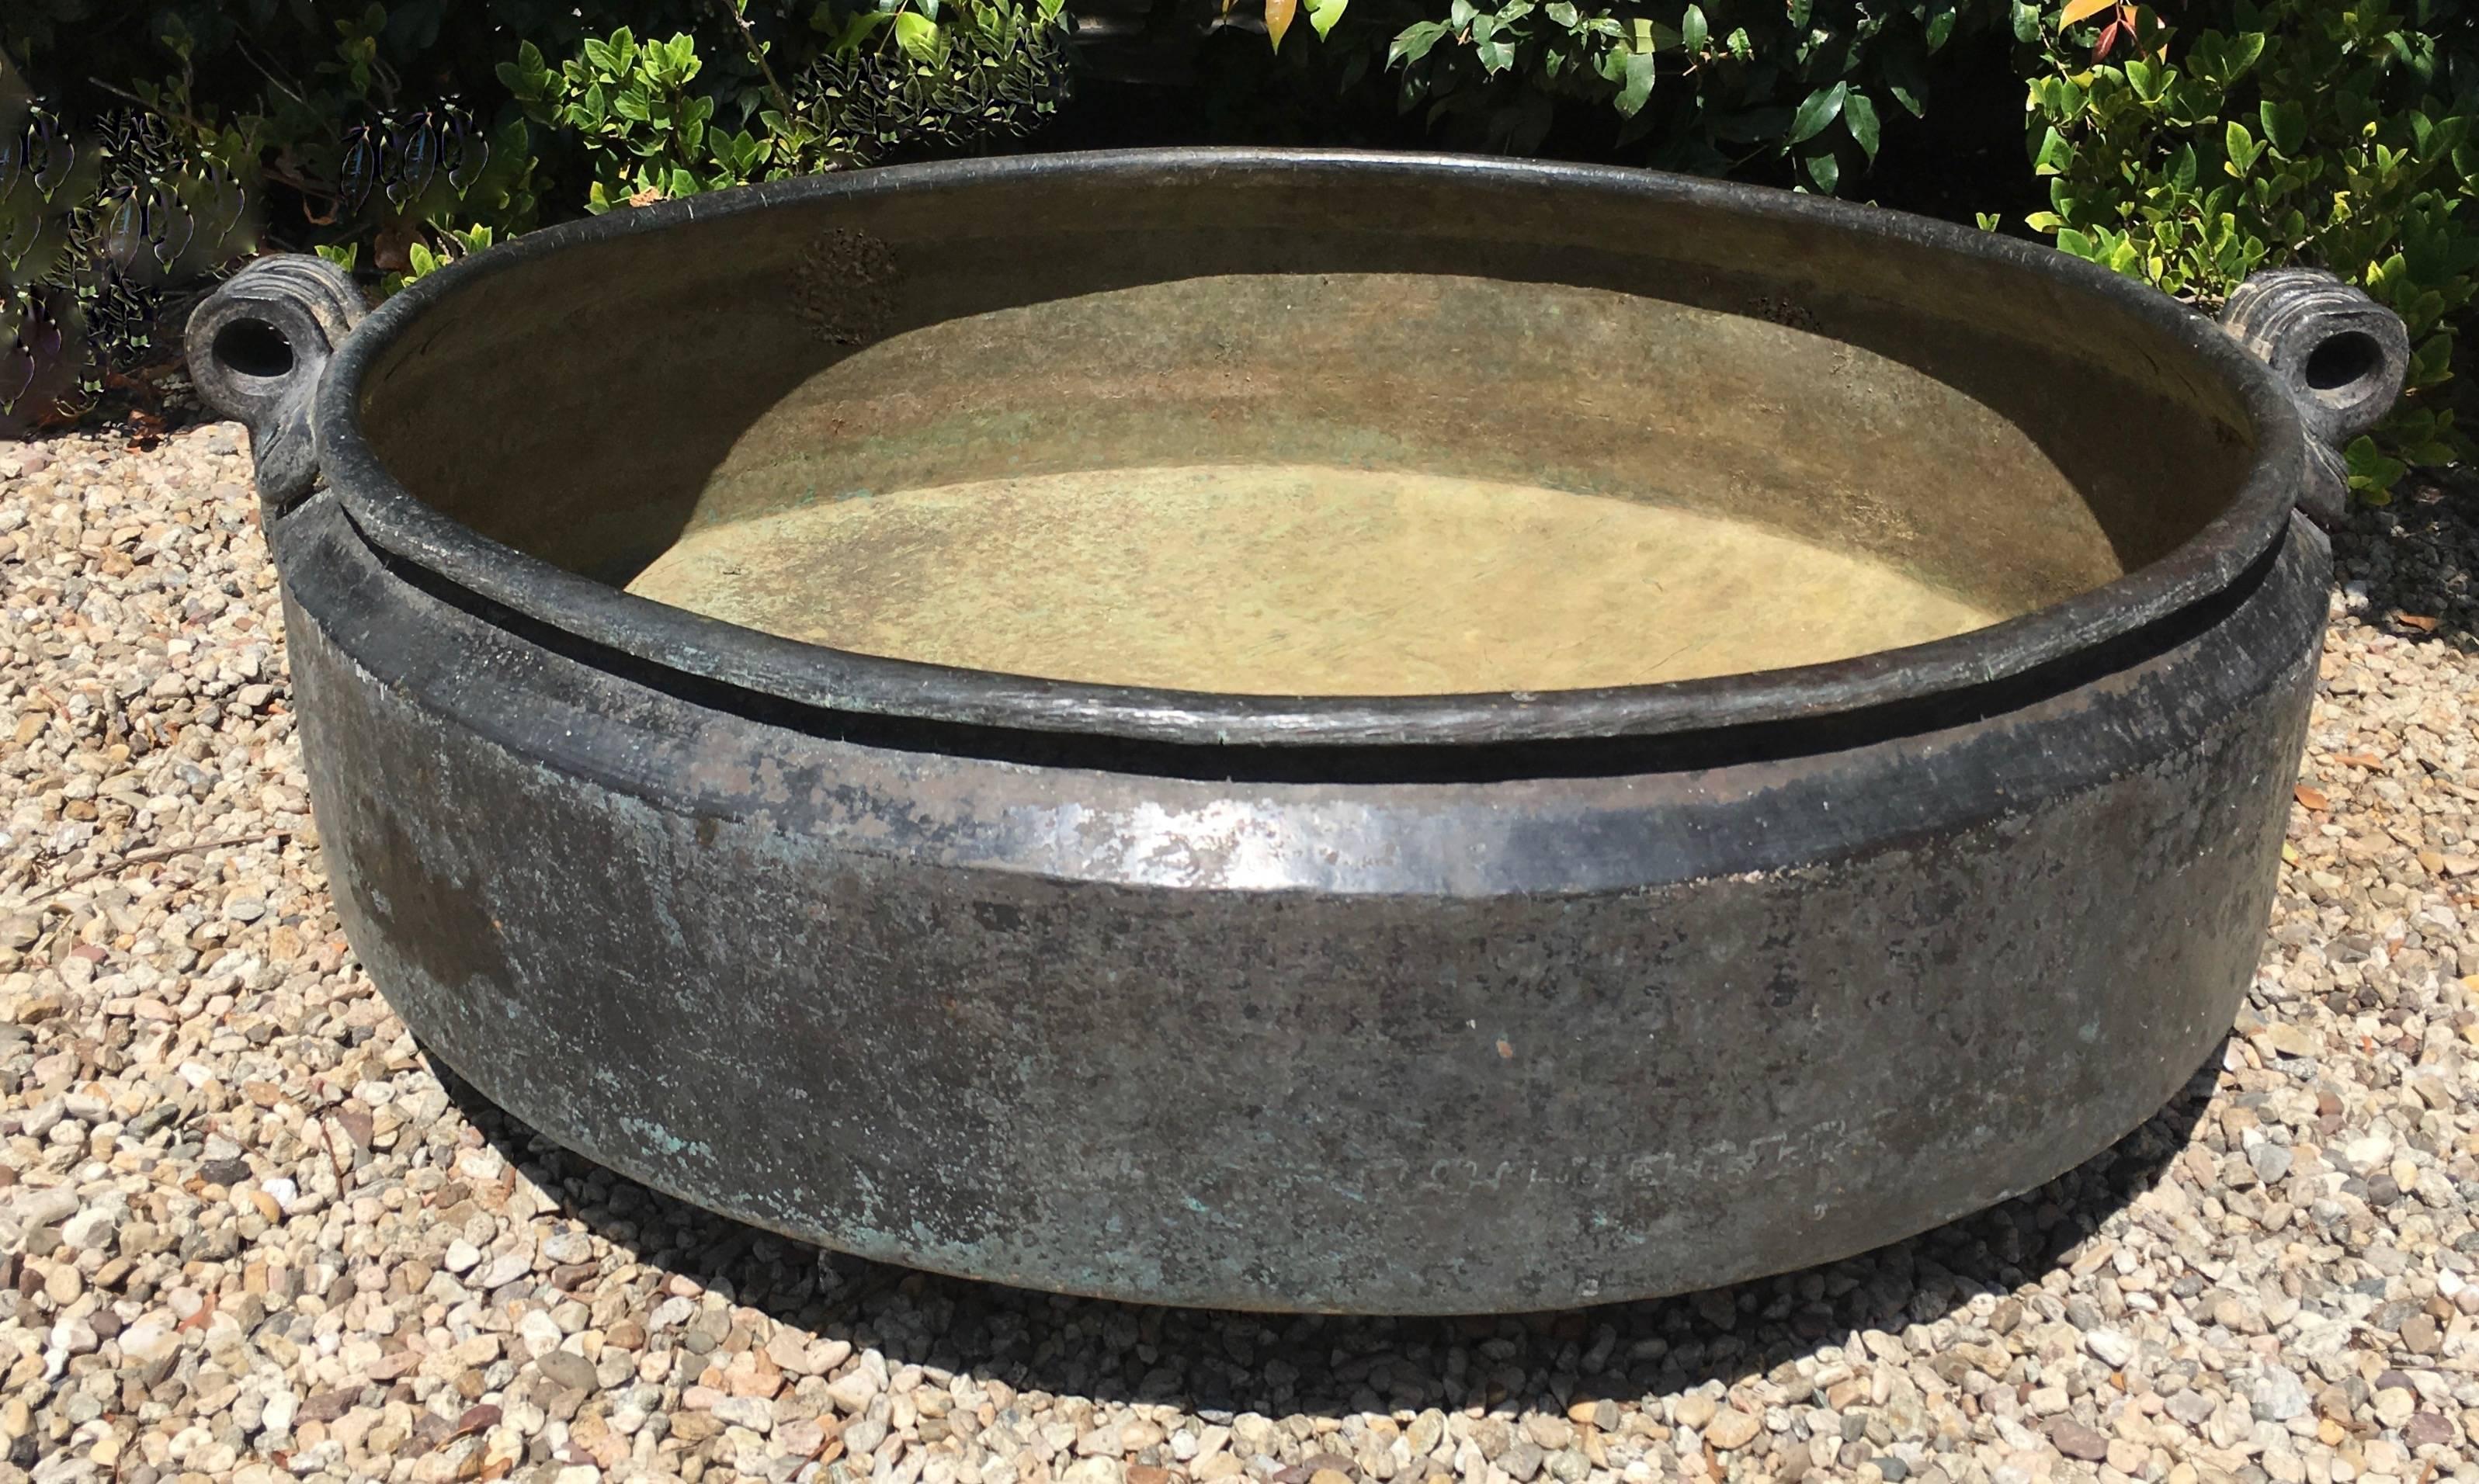 19th century Indian bronze urli bowl planter once used for cooking, the heavy bronze urli makes a great piece for plantings, a water feature, or perhaps to store firewood or blankets. 

The piece has a very good weight and is a compliment to any